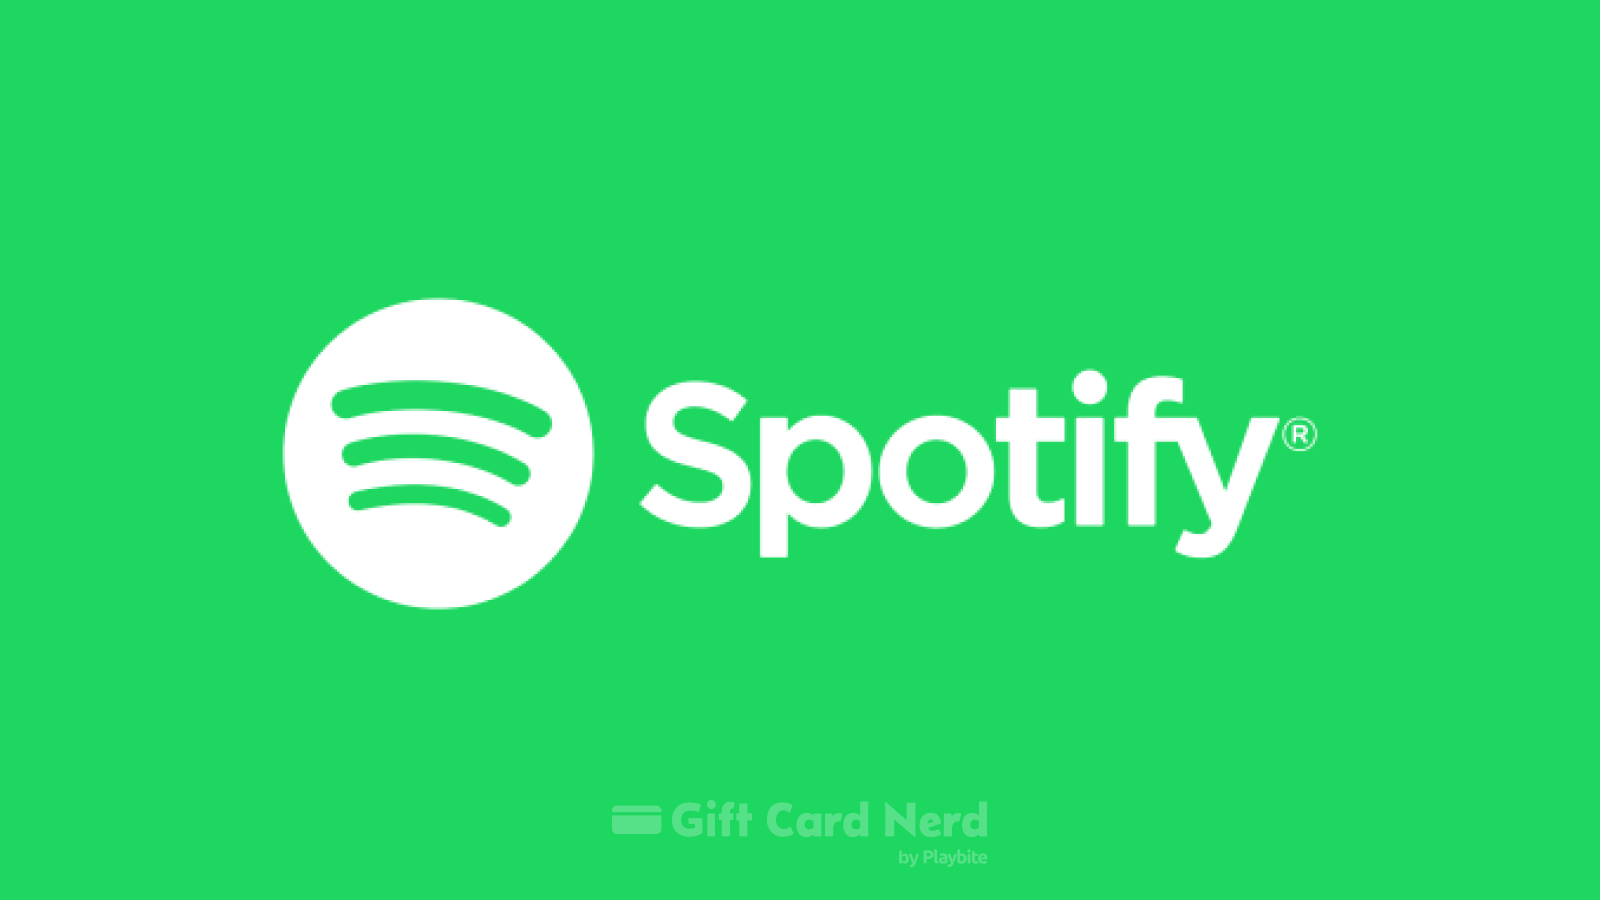 Where to Buy Spotify Gift Cards: Walgreens Edition